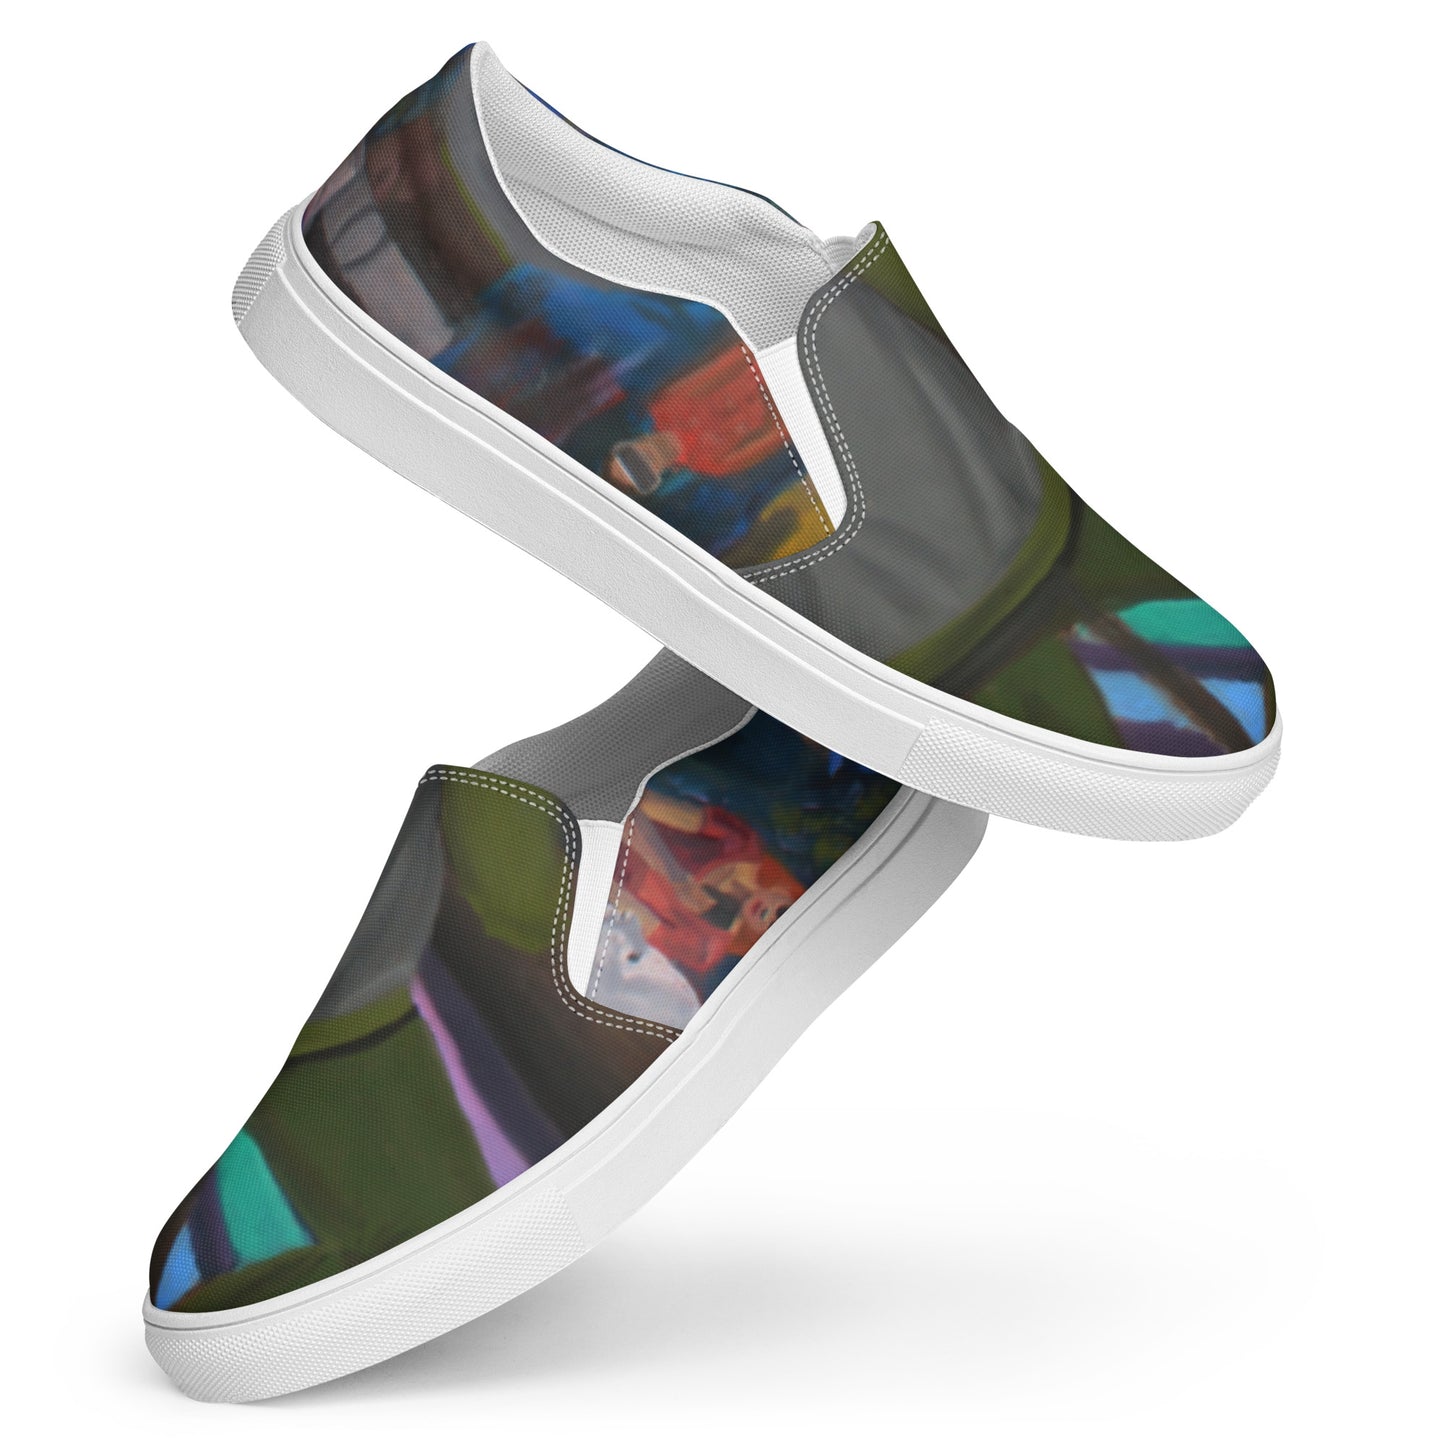 Year Year 2030 - Women’s slip-on canvas shoes